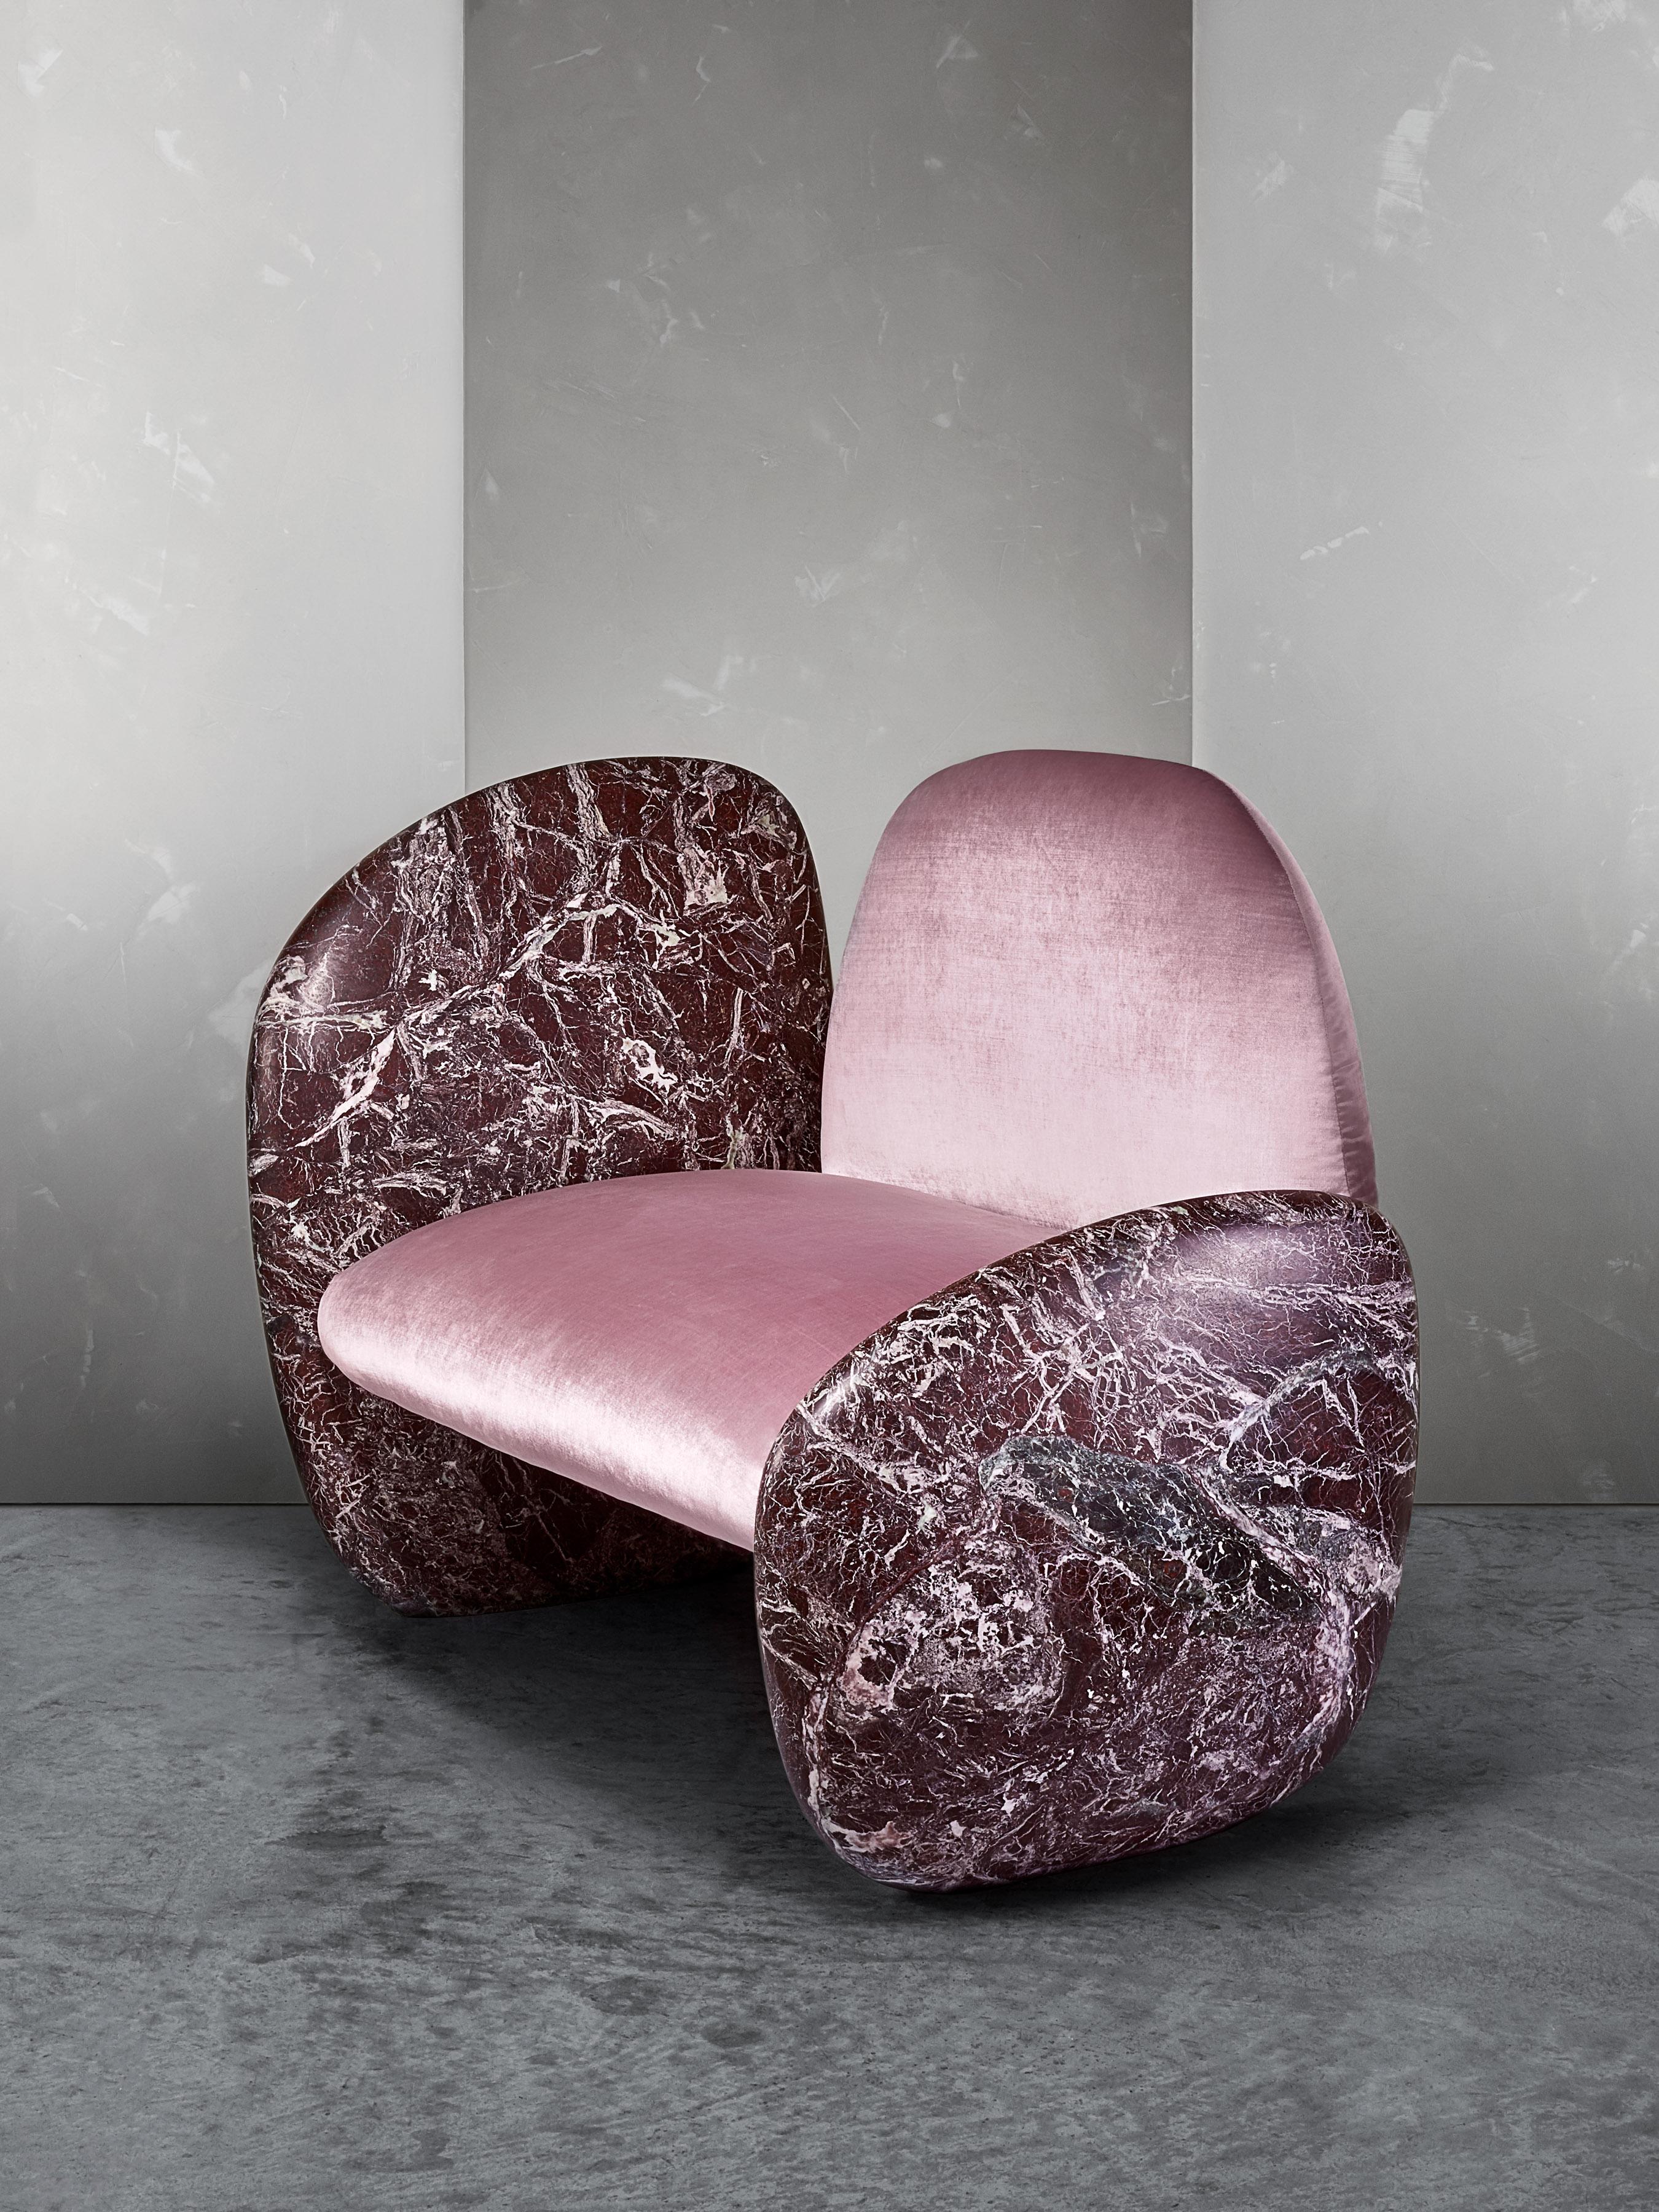 The Cabochon Lounge Chair is a rich combination of asymmetrical Calcutta marble and Paonazzo fabric. World renowned Italian designer, Antonio Pio Saracino, drew inspiration for The Cabochon Lounge chair from our rhodochrosite specimens, detailing